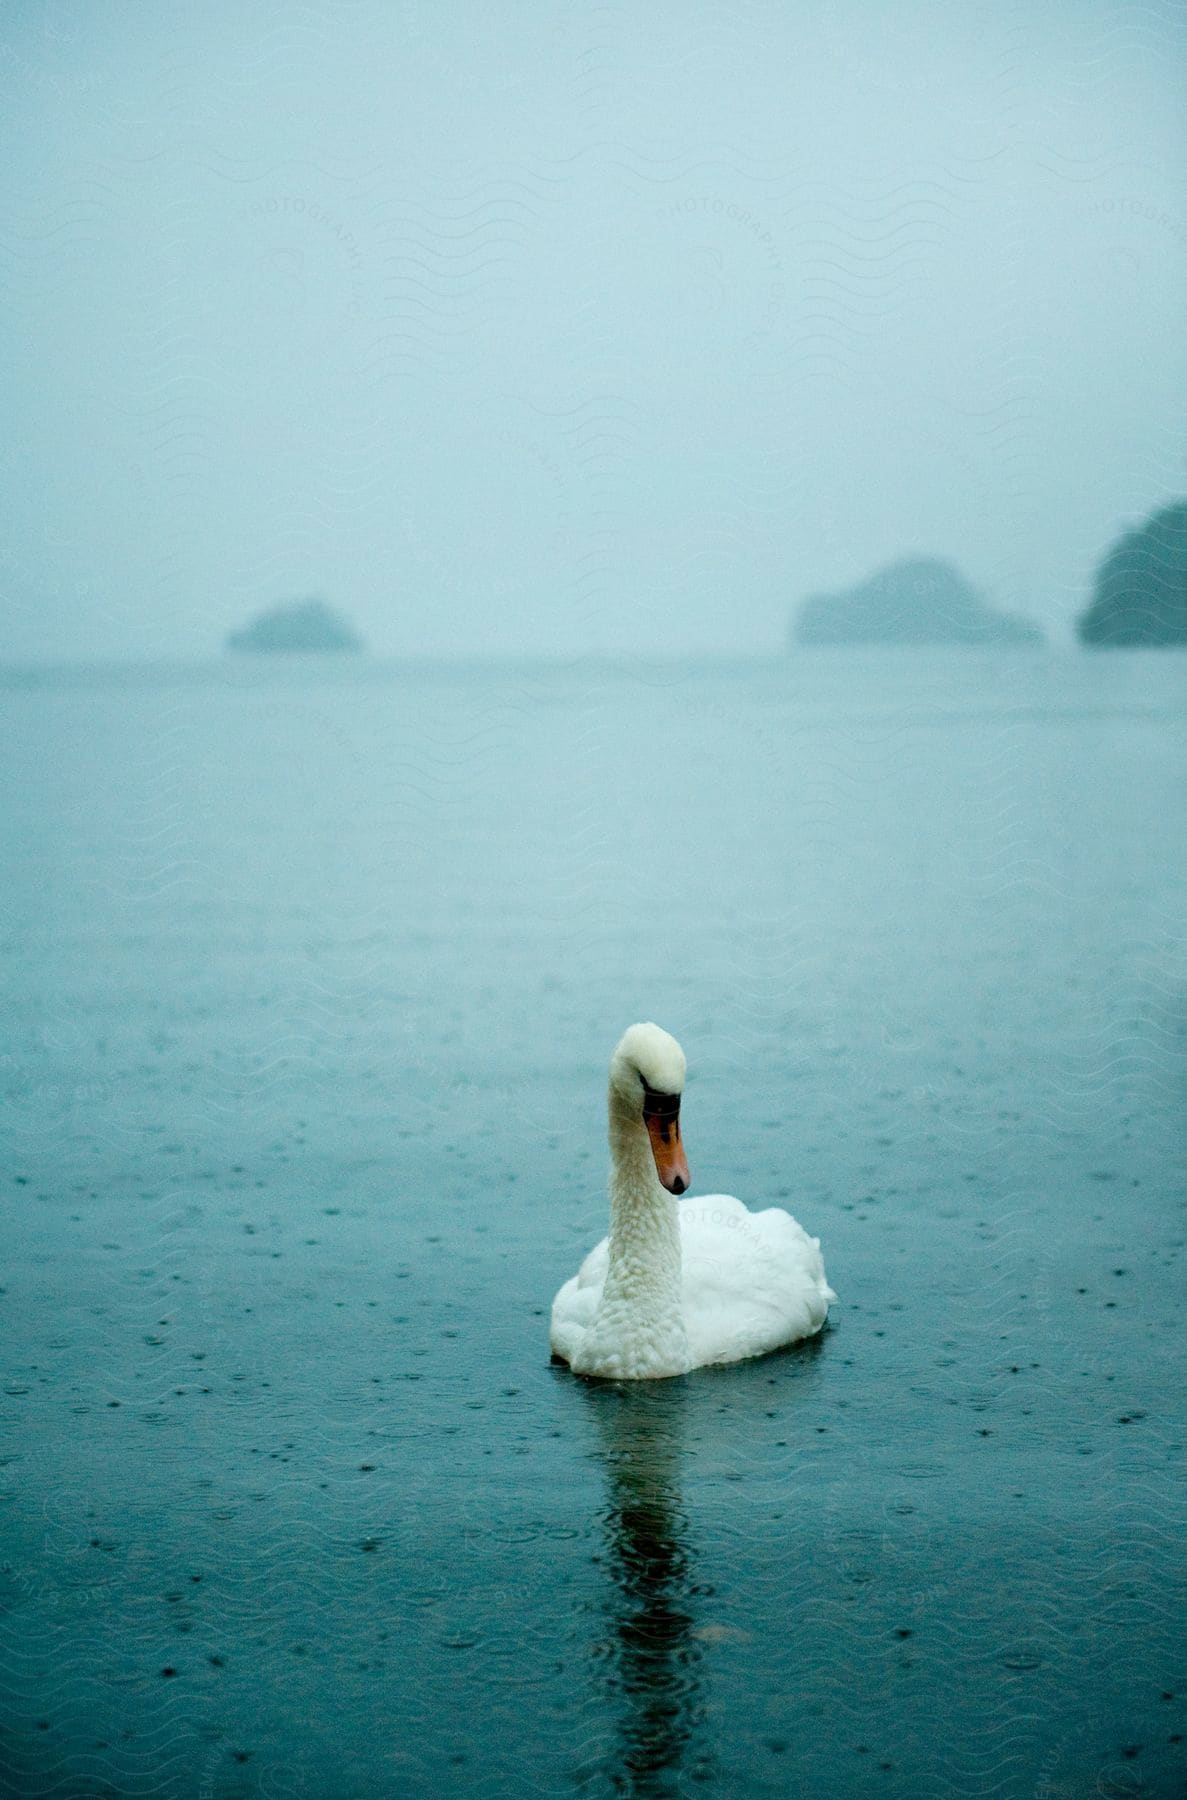 A White Swan Floats On A Misty, Stock Image 105523